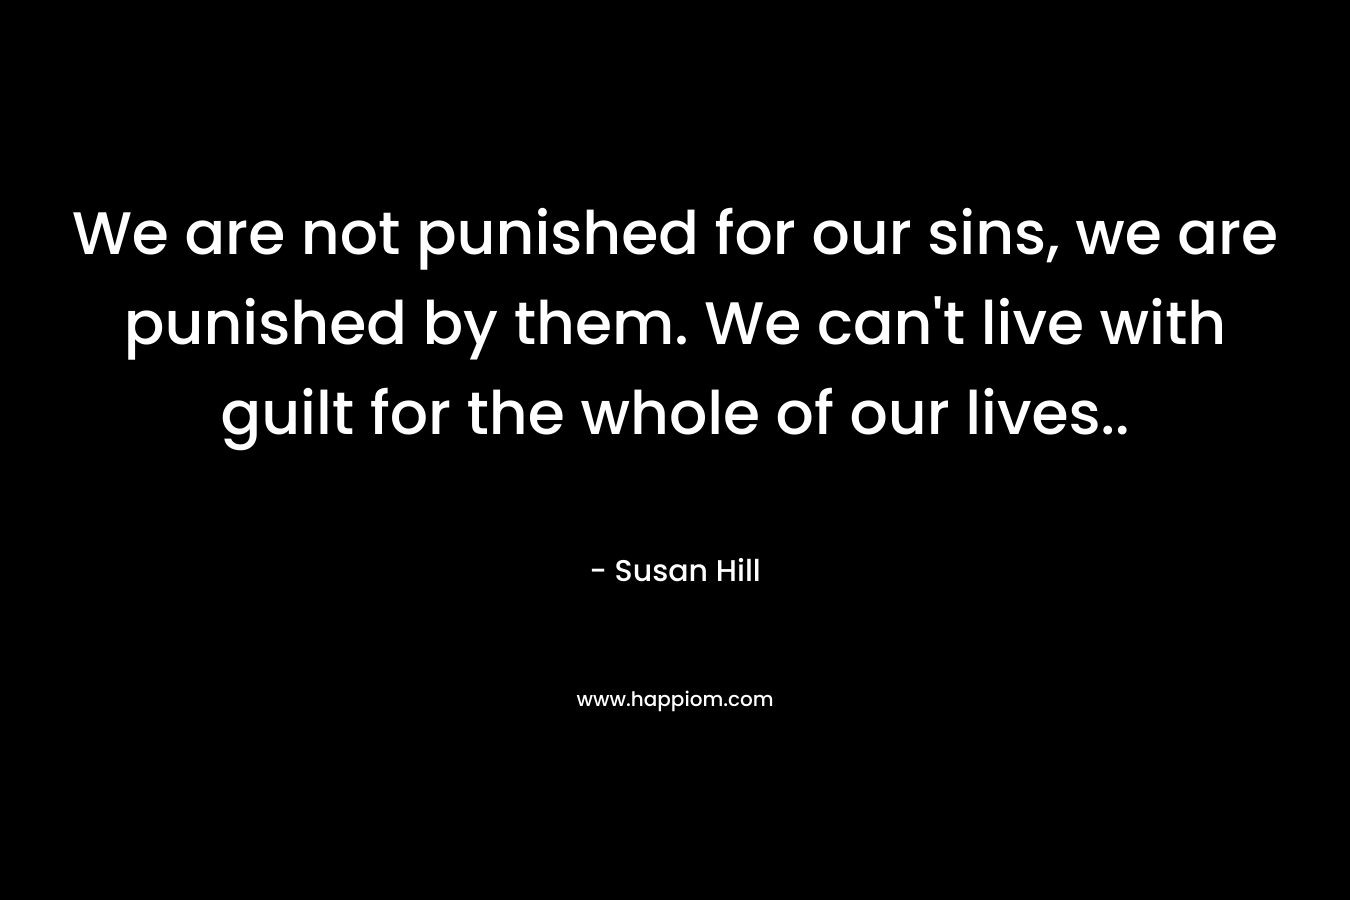 We are not punished for our sins, we are punished by them. We can’t live with guilt for the whole of our lives.. – Susan Hill